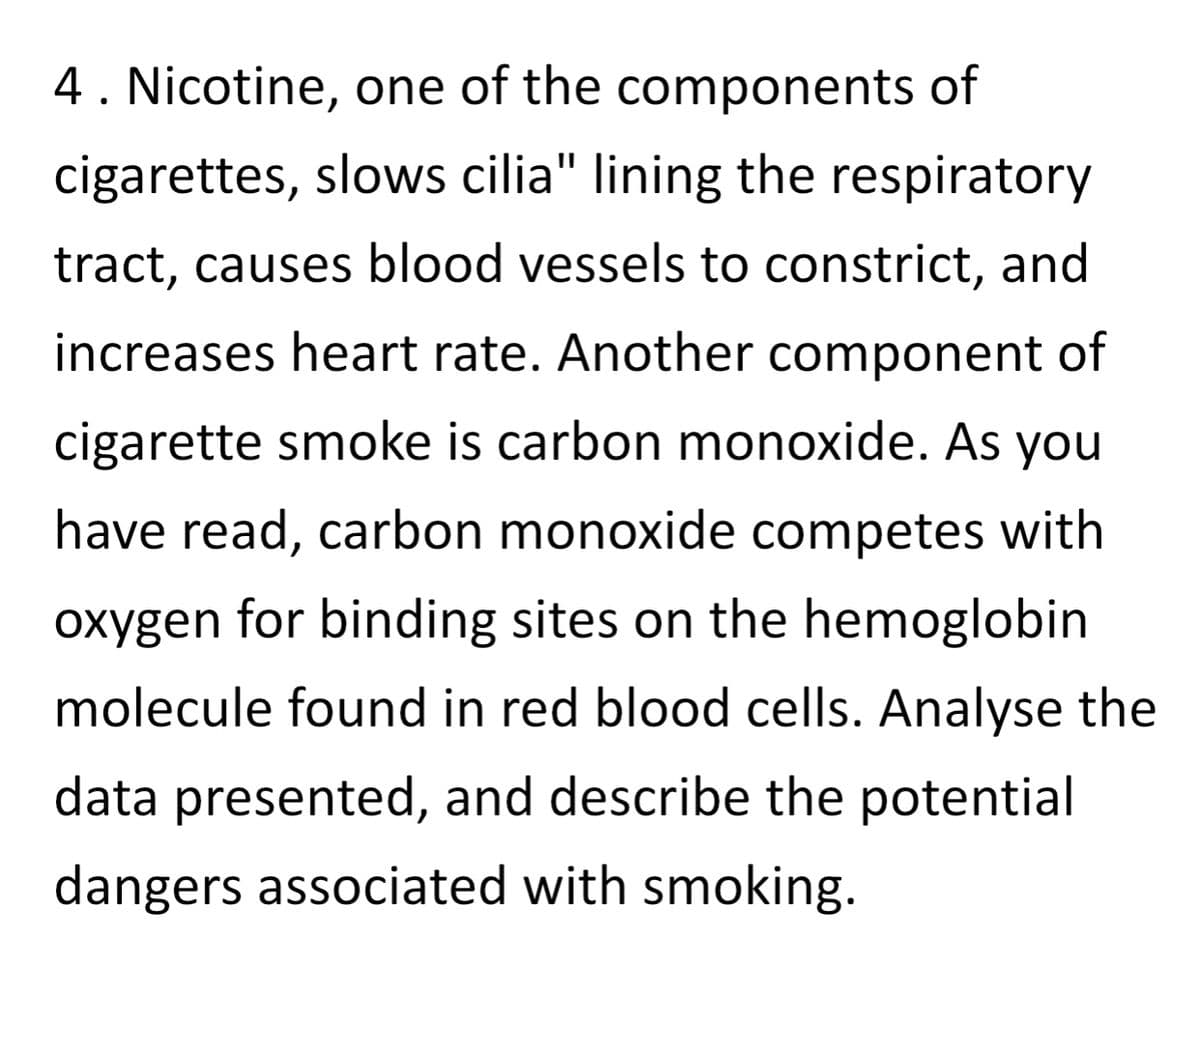 4. Nicotine, one of the components of
cigarettes, slows cilia" lining the respiratory
tract, causes blood vessels to constrict, and
increases heart rate. Another component of
cigarette smoke is carbon monoxide. As you
have read, carbon monoxide competes with
oxygen for binding sites on the hemoglobin
molecule found in red blood cells. Analyse the
data presented, and describe the potential
dangers associated with smoking.